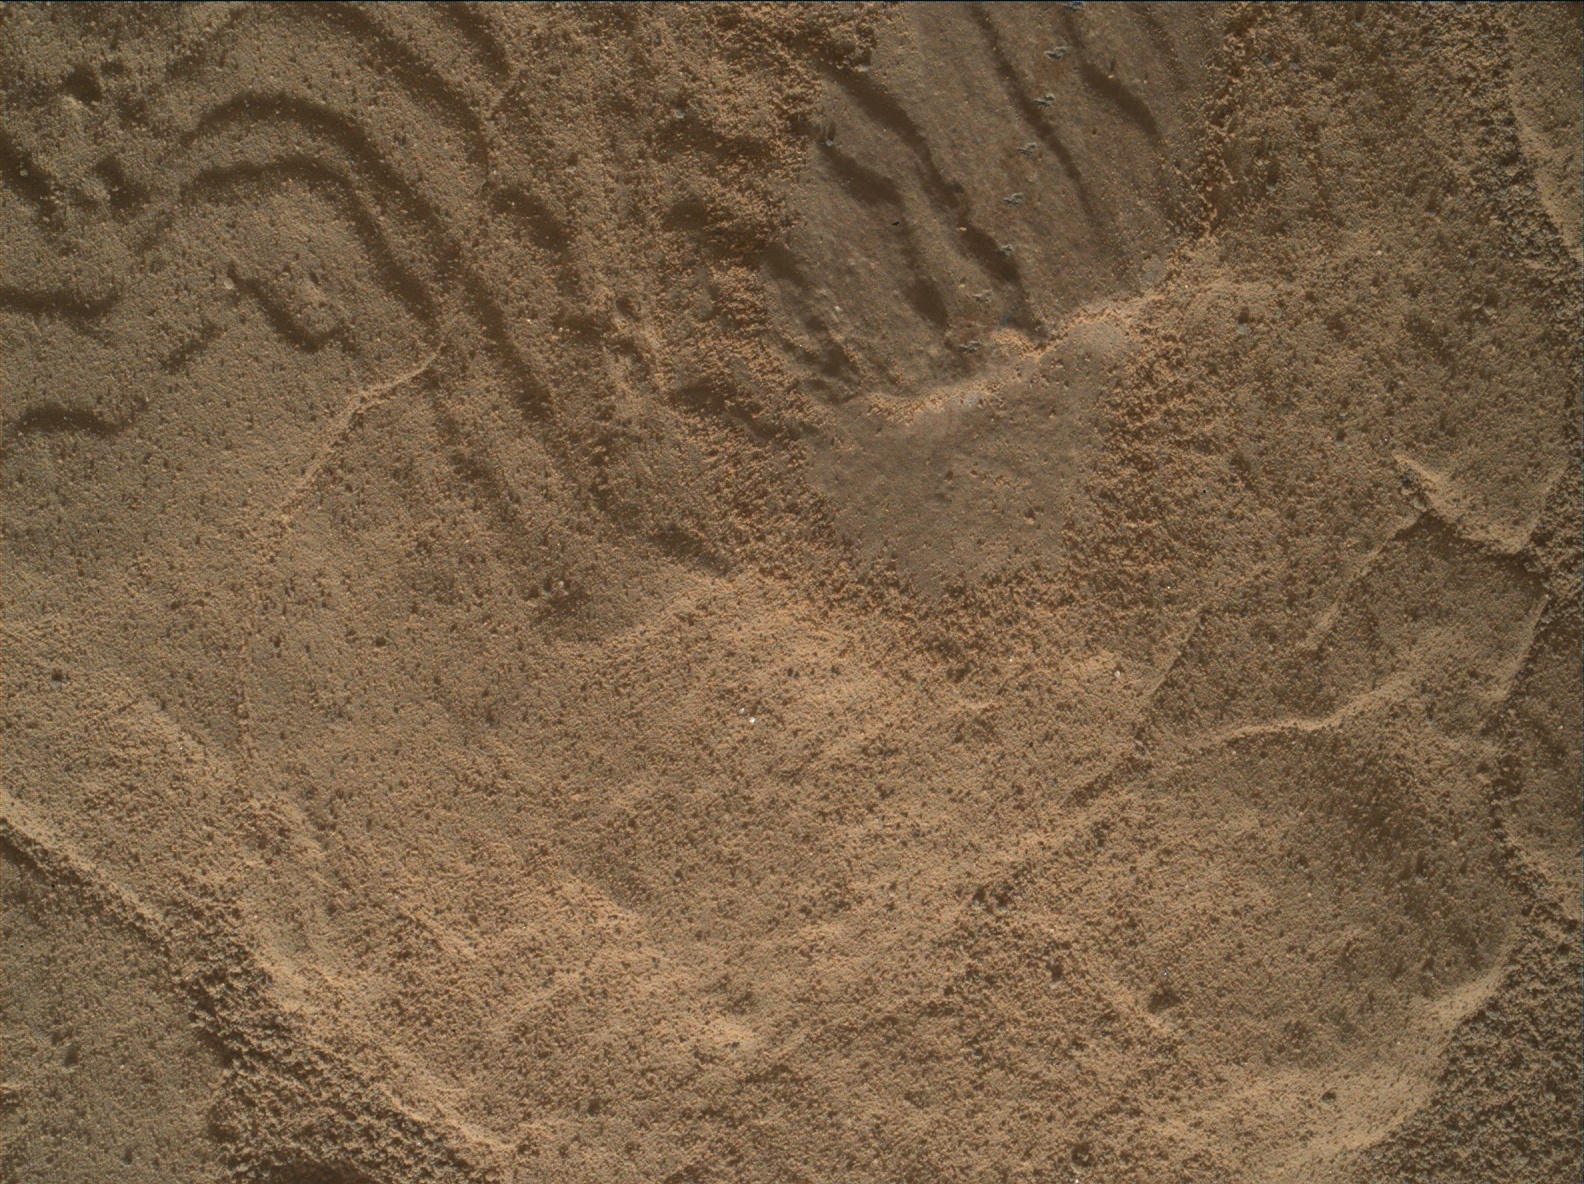 Nasa's Mars rover Curiosity acquired this image using its Mars Hand Lens Imager (MAHLI) on Sol 2602